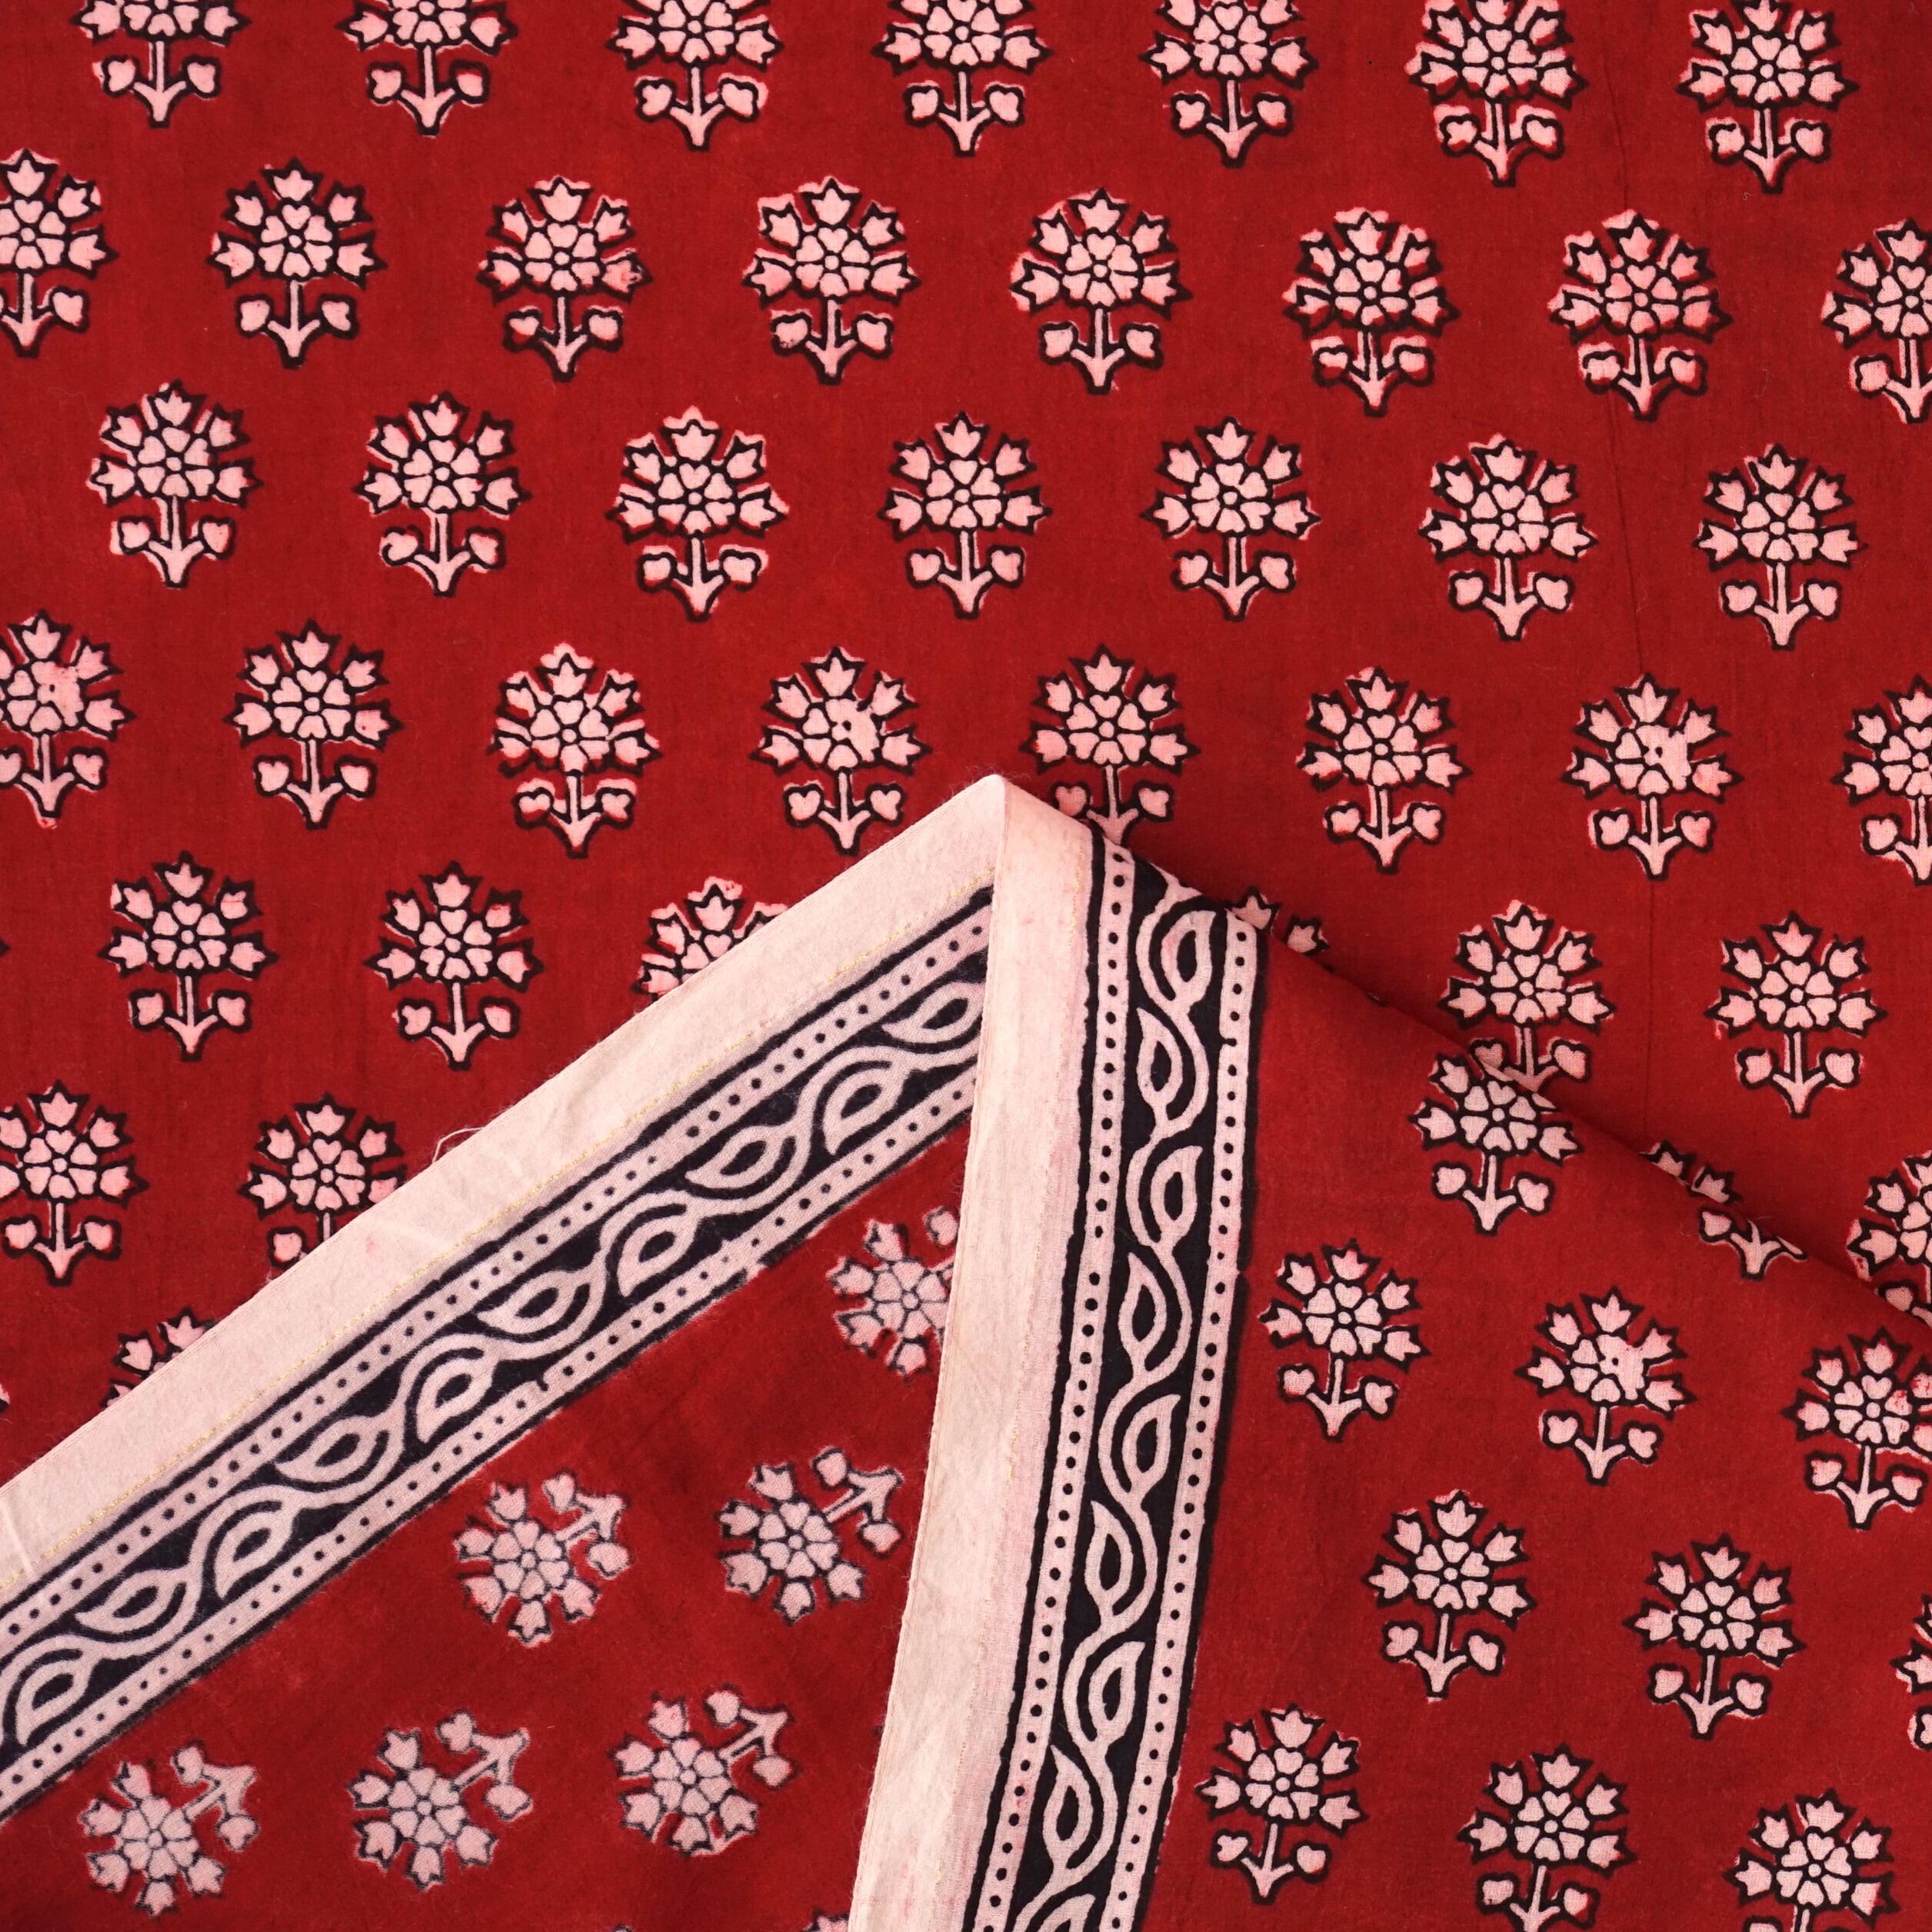 3 - ISK10 - 100% Block-Printed Cotton Fabric From India - New Perspective Design - Iron Rust Black & Alizarin Red Dyes - Selvedge